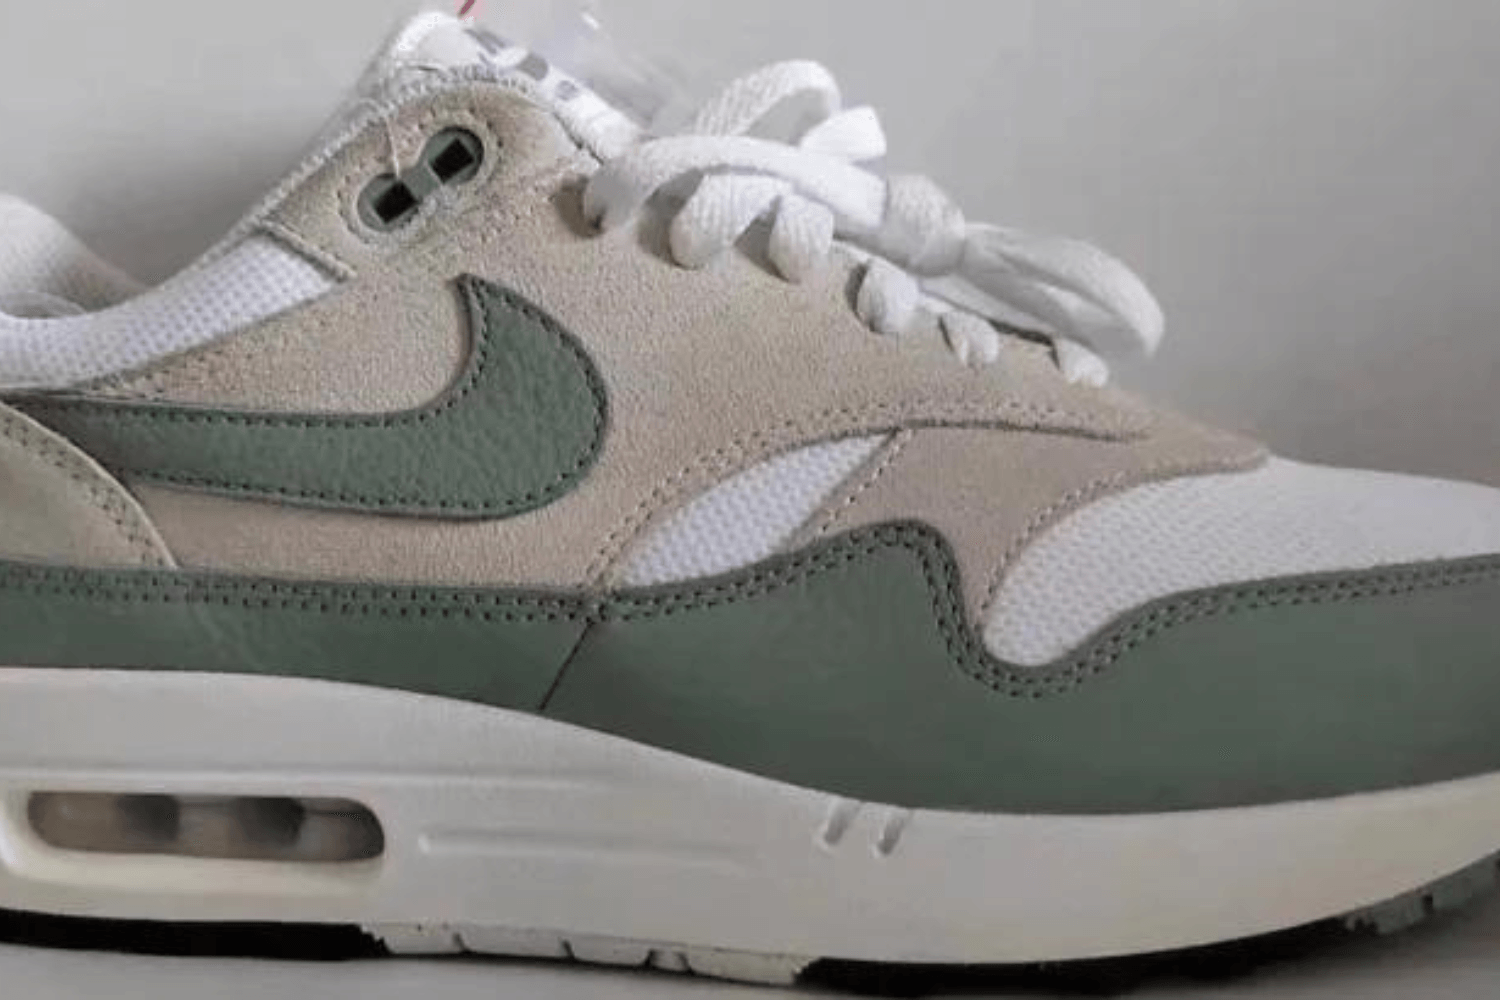 The Nike Air Max 1 'Mica Green' drops in 2023